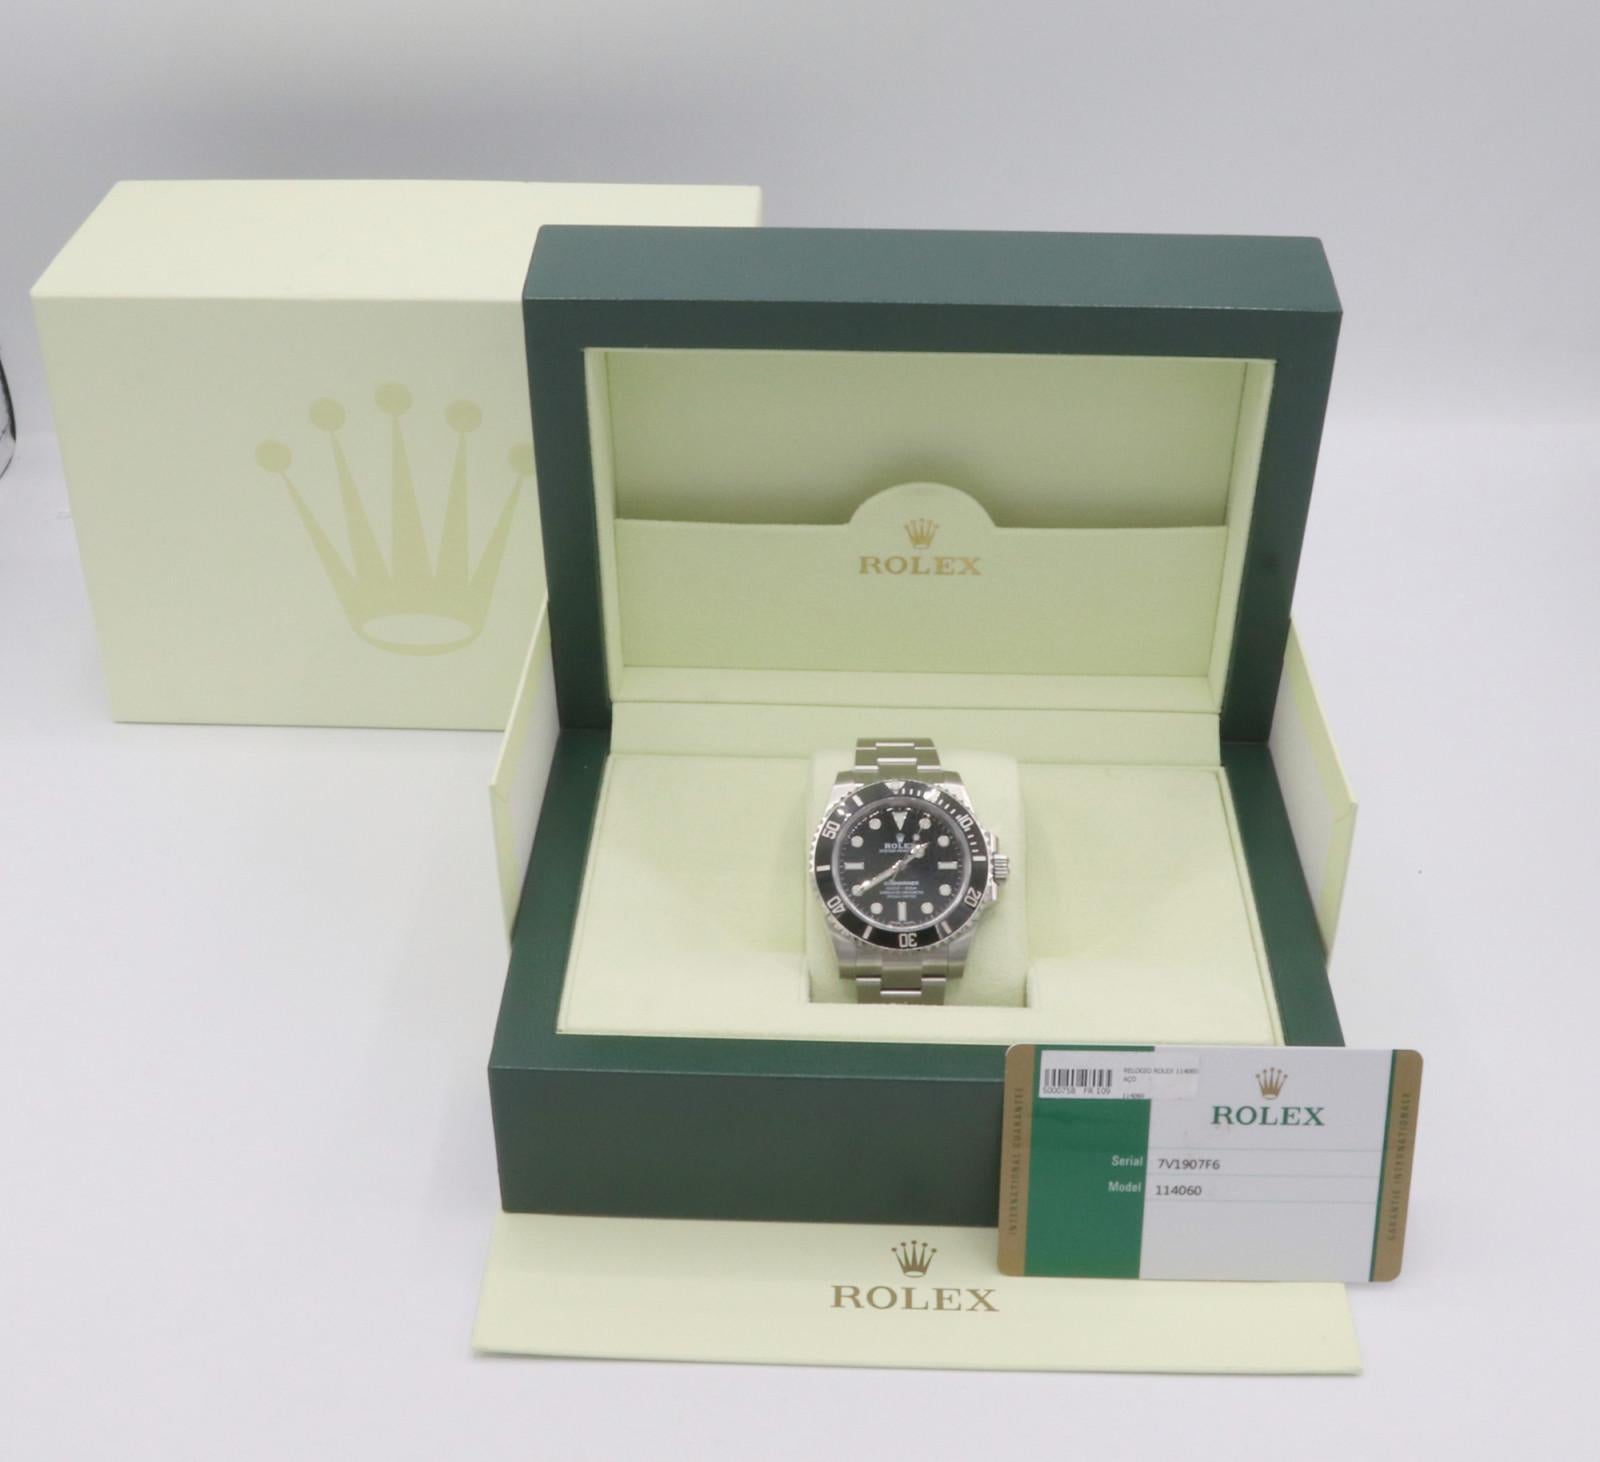 Montre Rolex Submariner Stainless Steel No Date Reference 114060 en vente 3